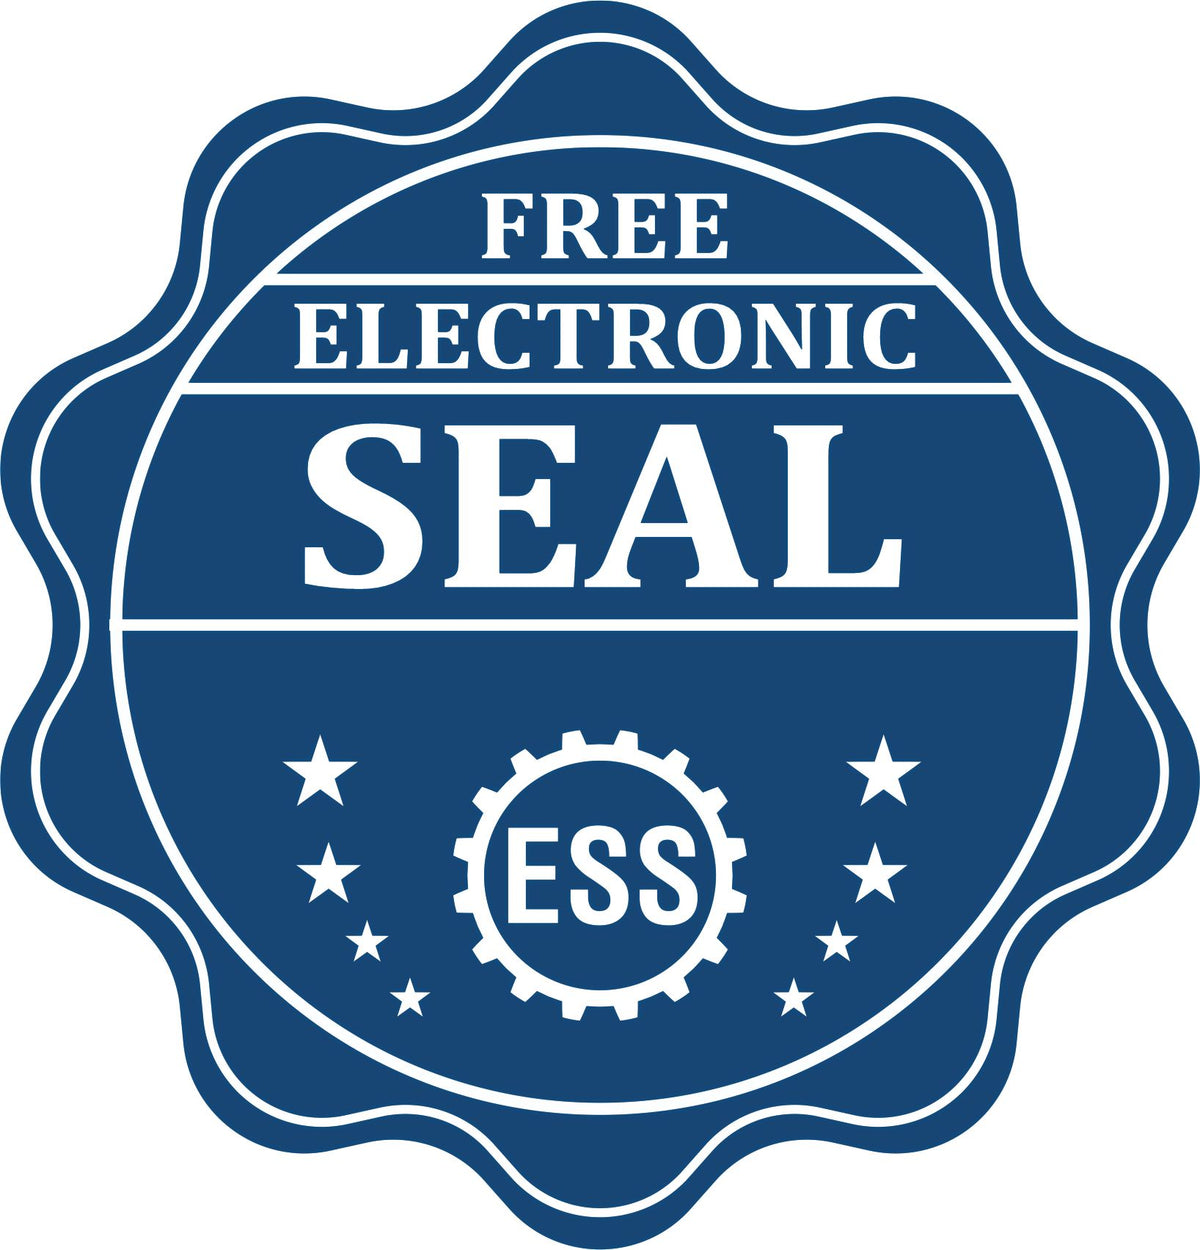 A badge showing a free electronic seal for the Wooden Handle Kansas State Seal Notary Public Stamp with stars and the ESS gear on the emblem.